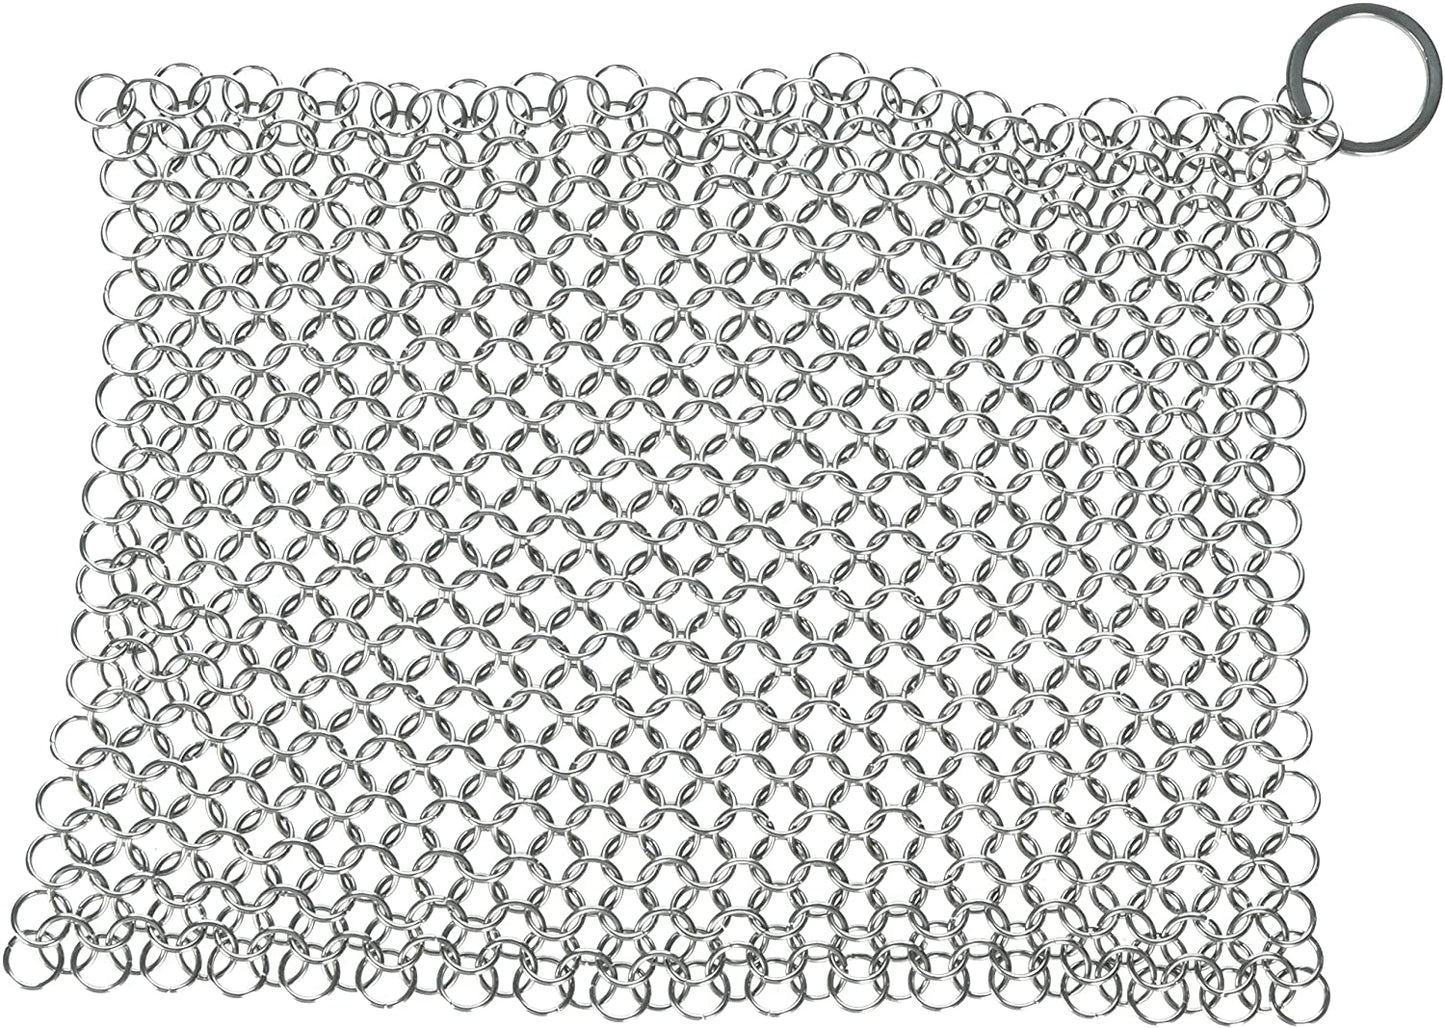 7" x 7" Chainmail Scrubber - CMS7